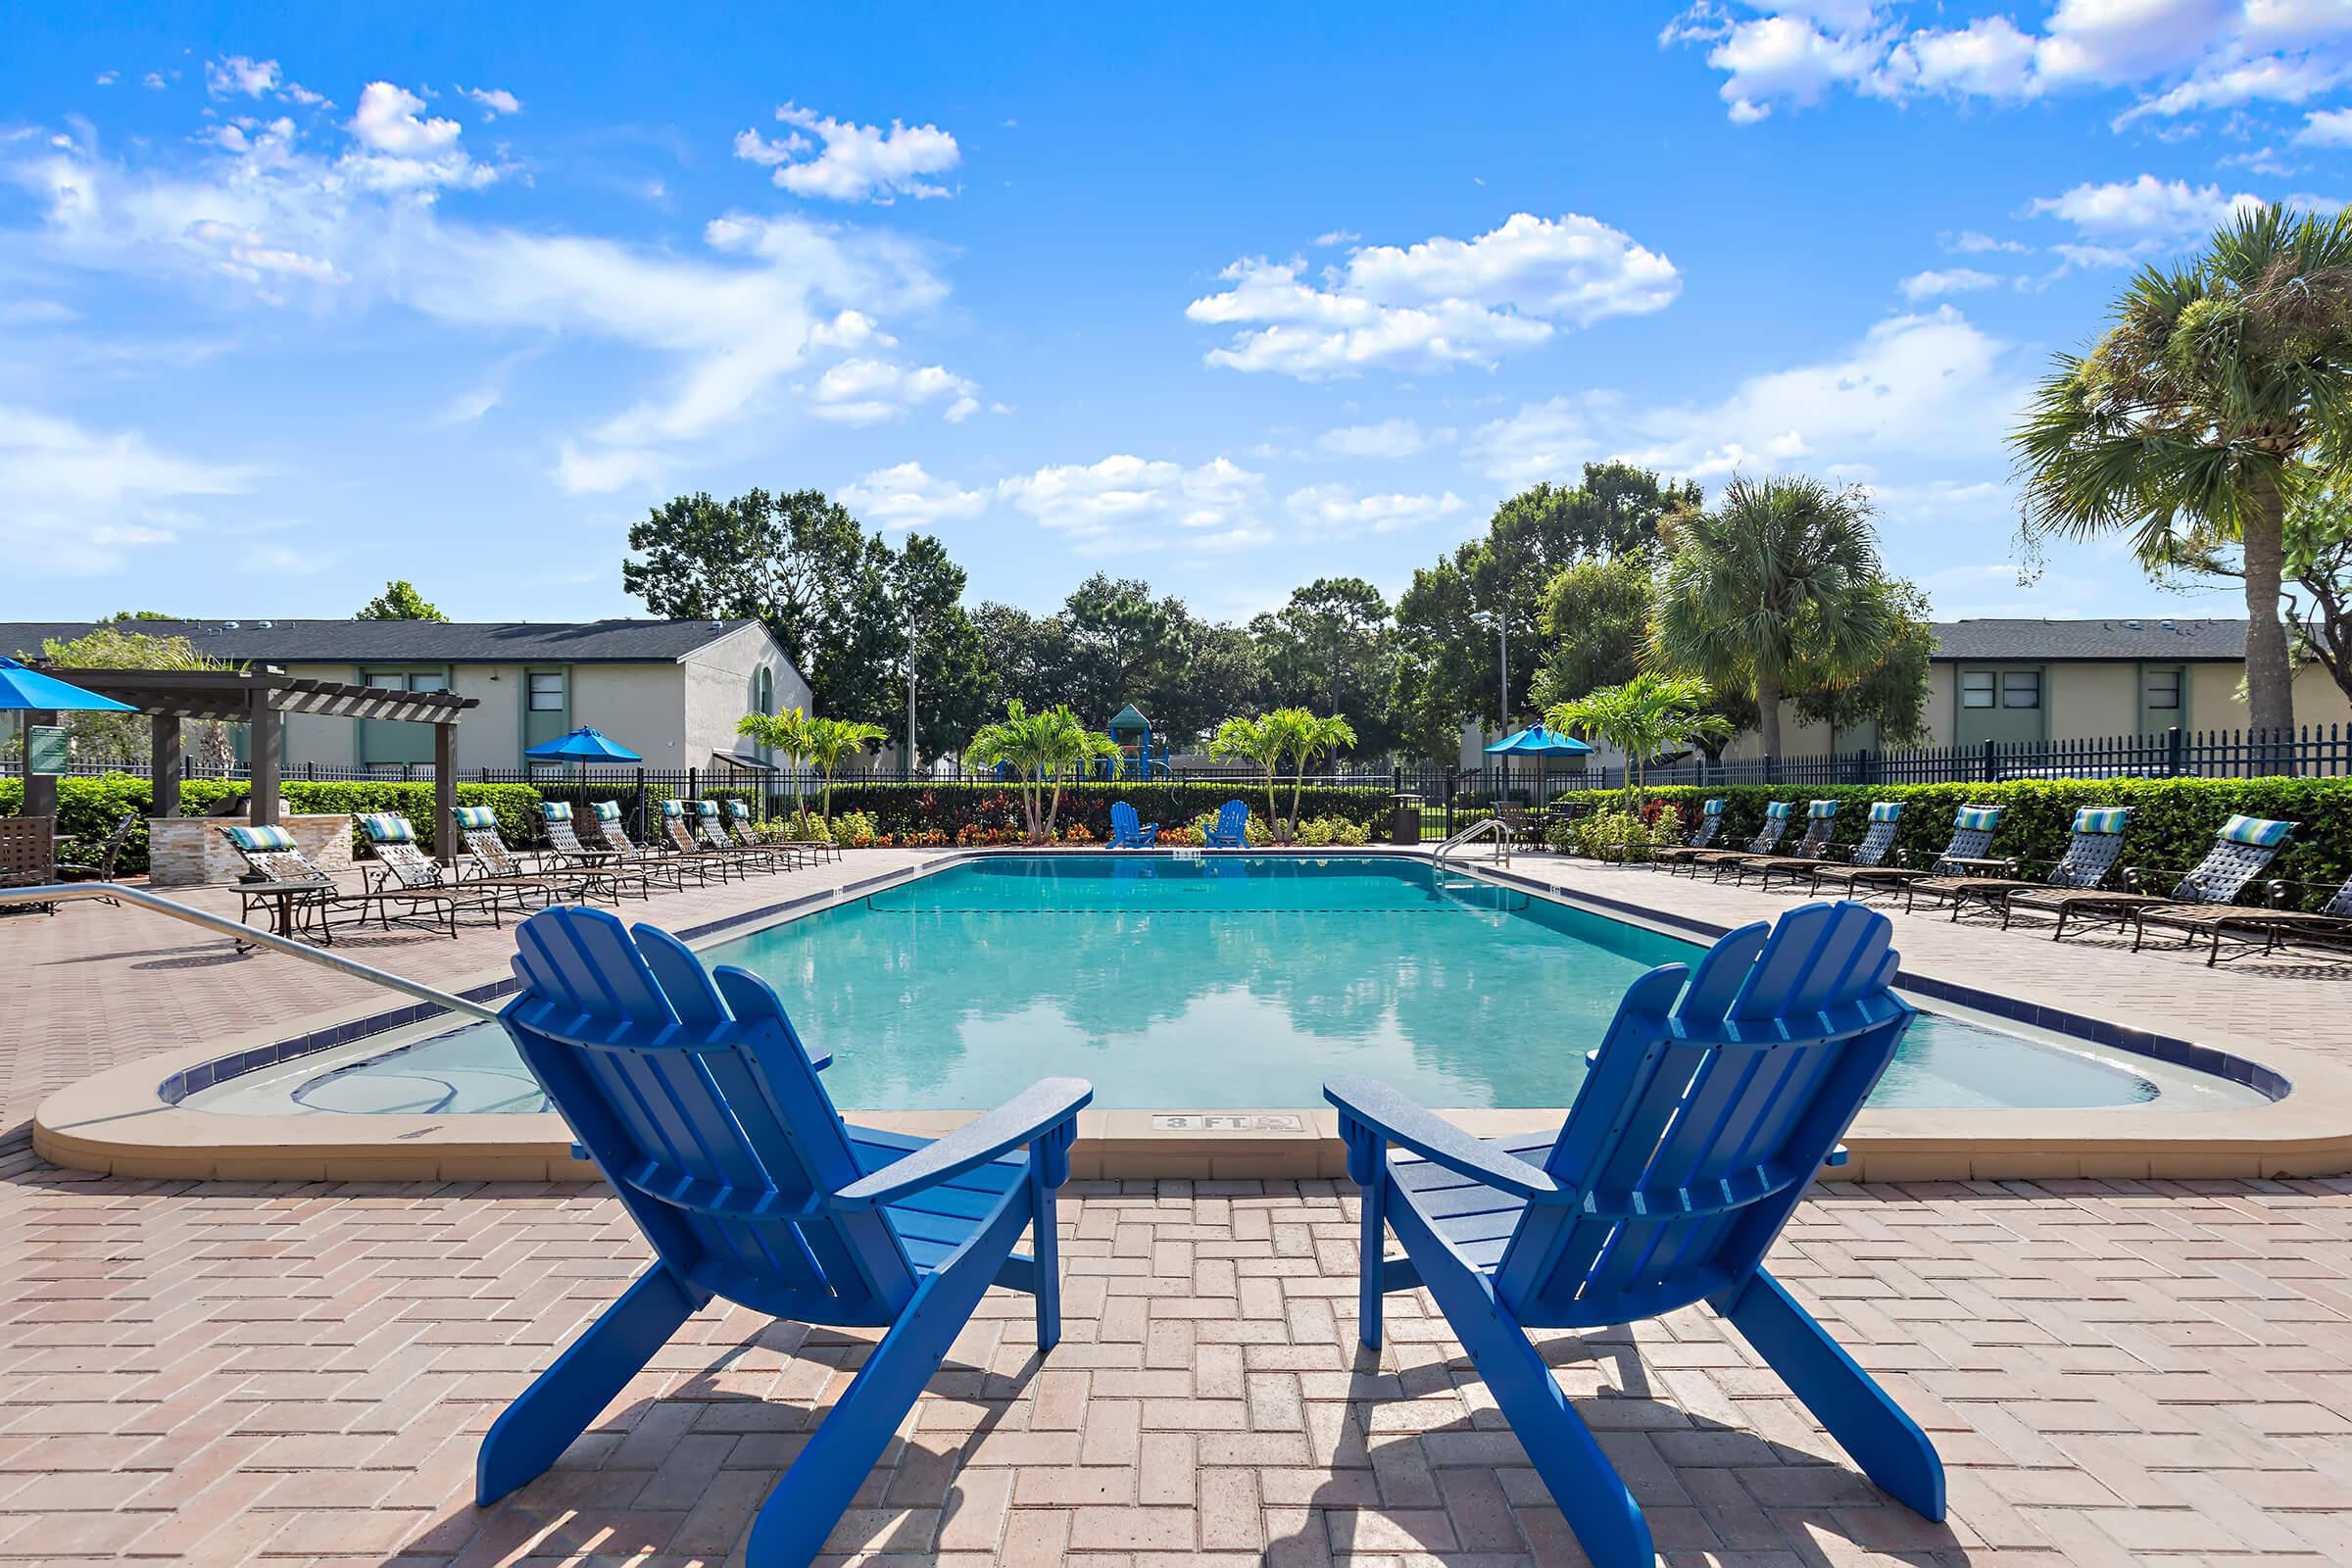 Soak Up the Sun at the Oasis at Bayside in Largo, Florida